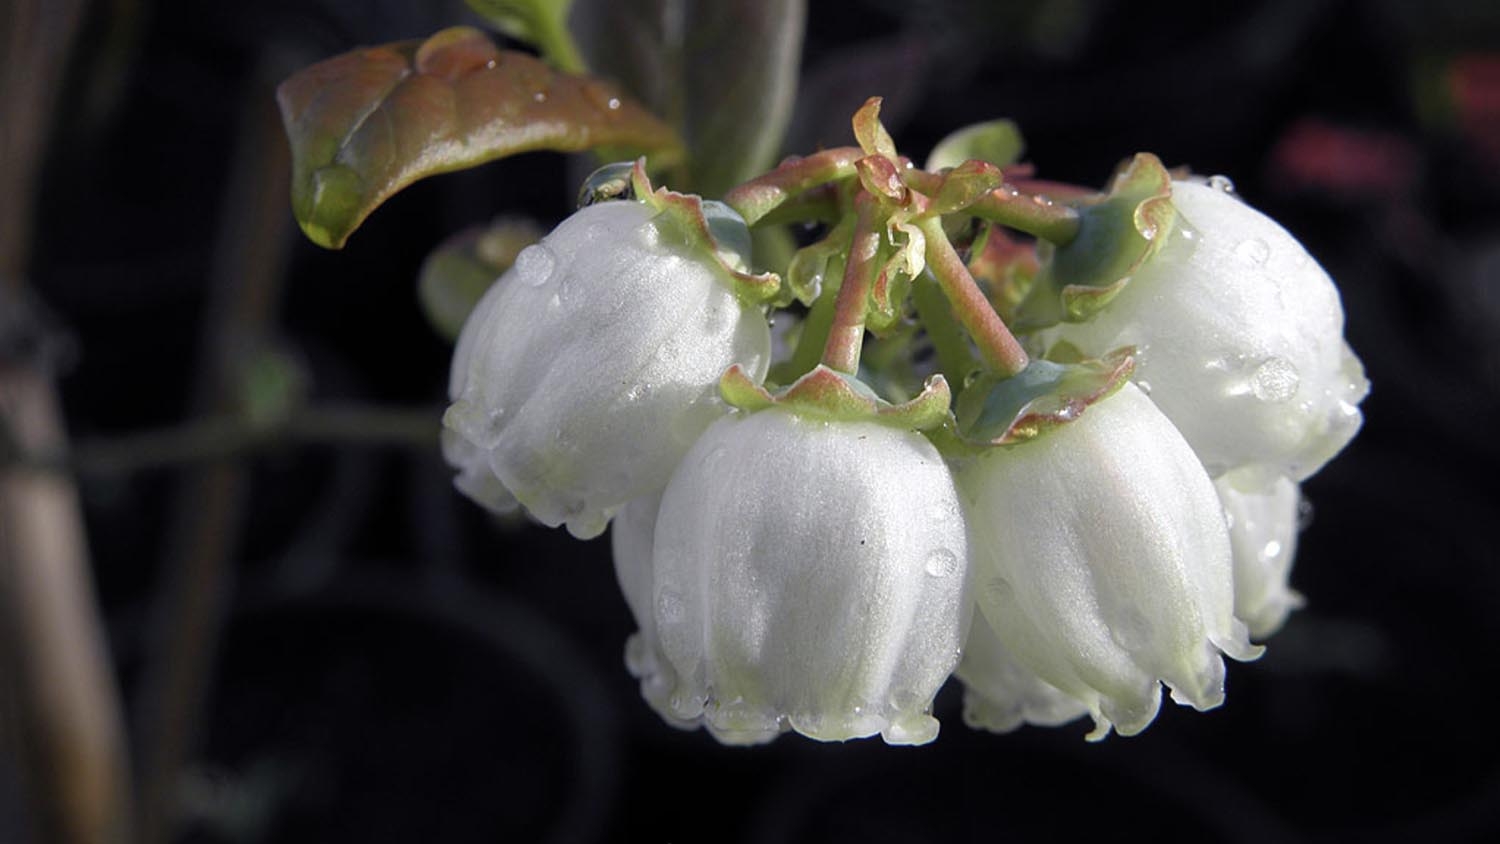 small white bulb shaped flowers on a blueberry plant